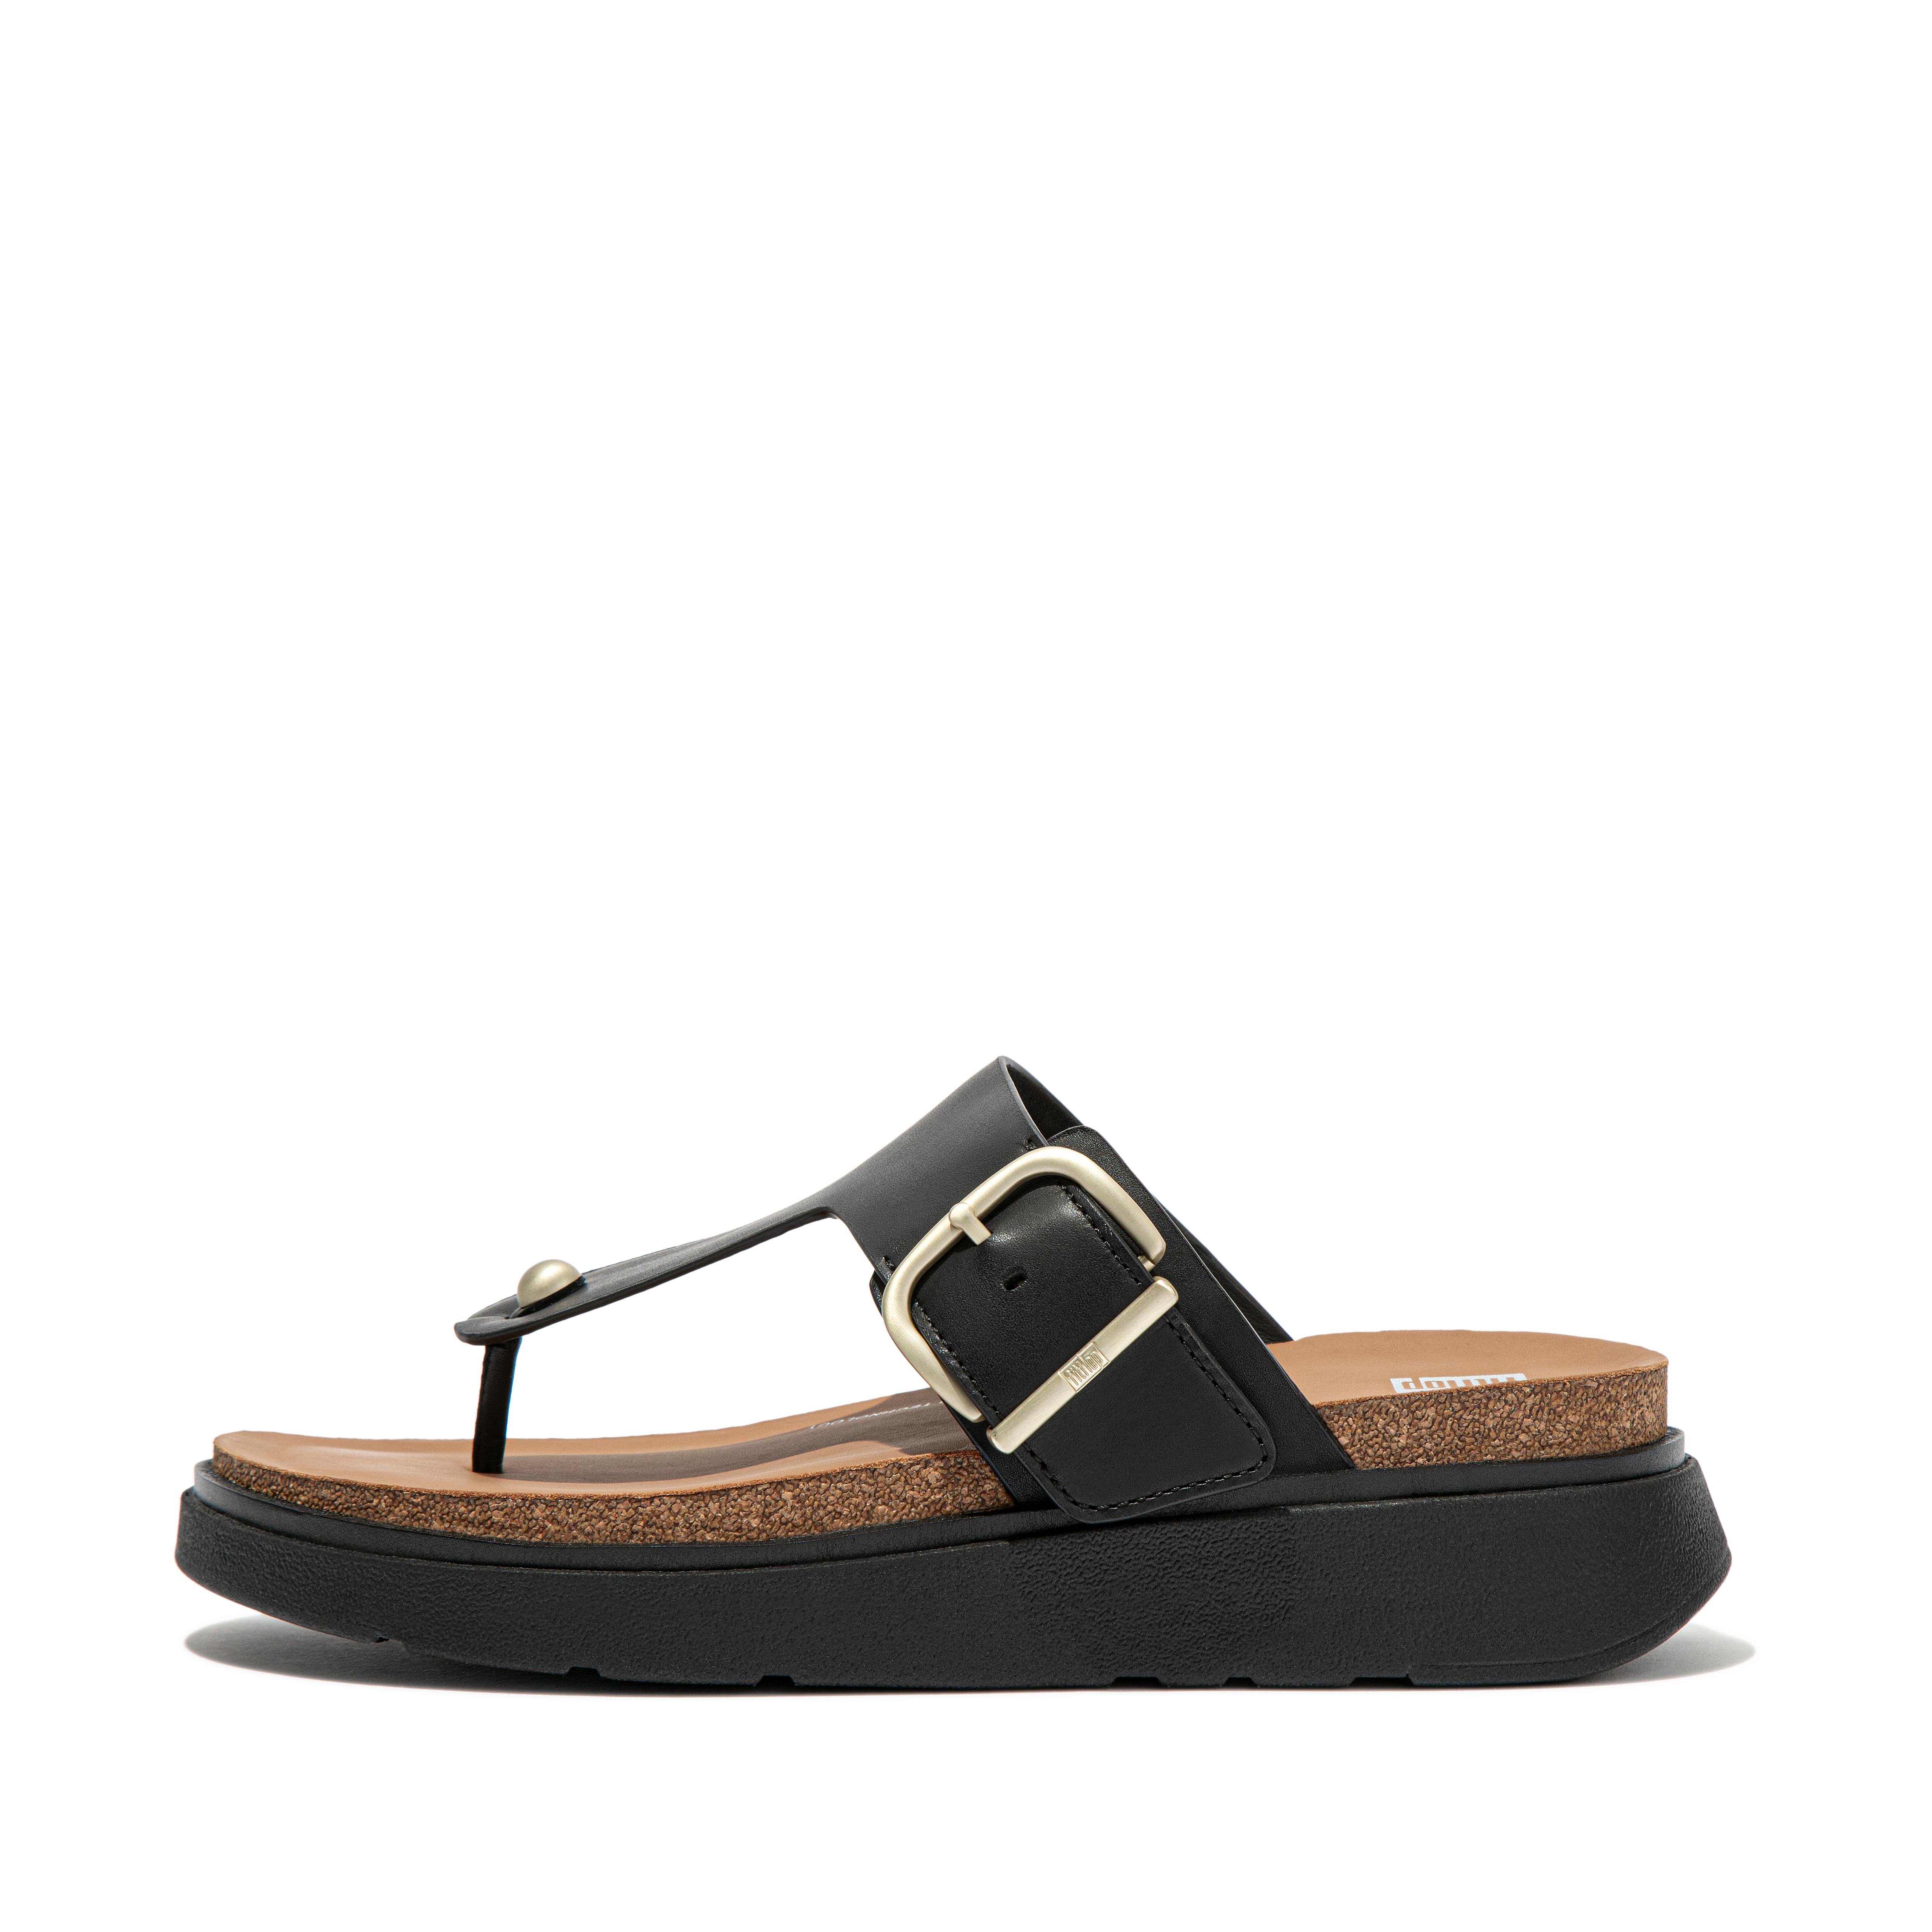 Fitflop Buckle Leather Toe-Post Sandals,Black